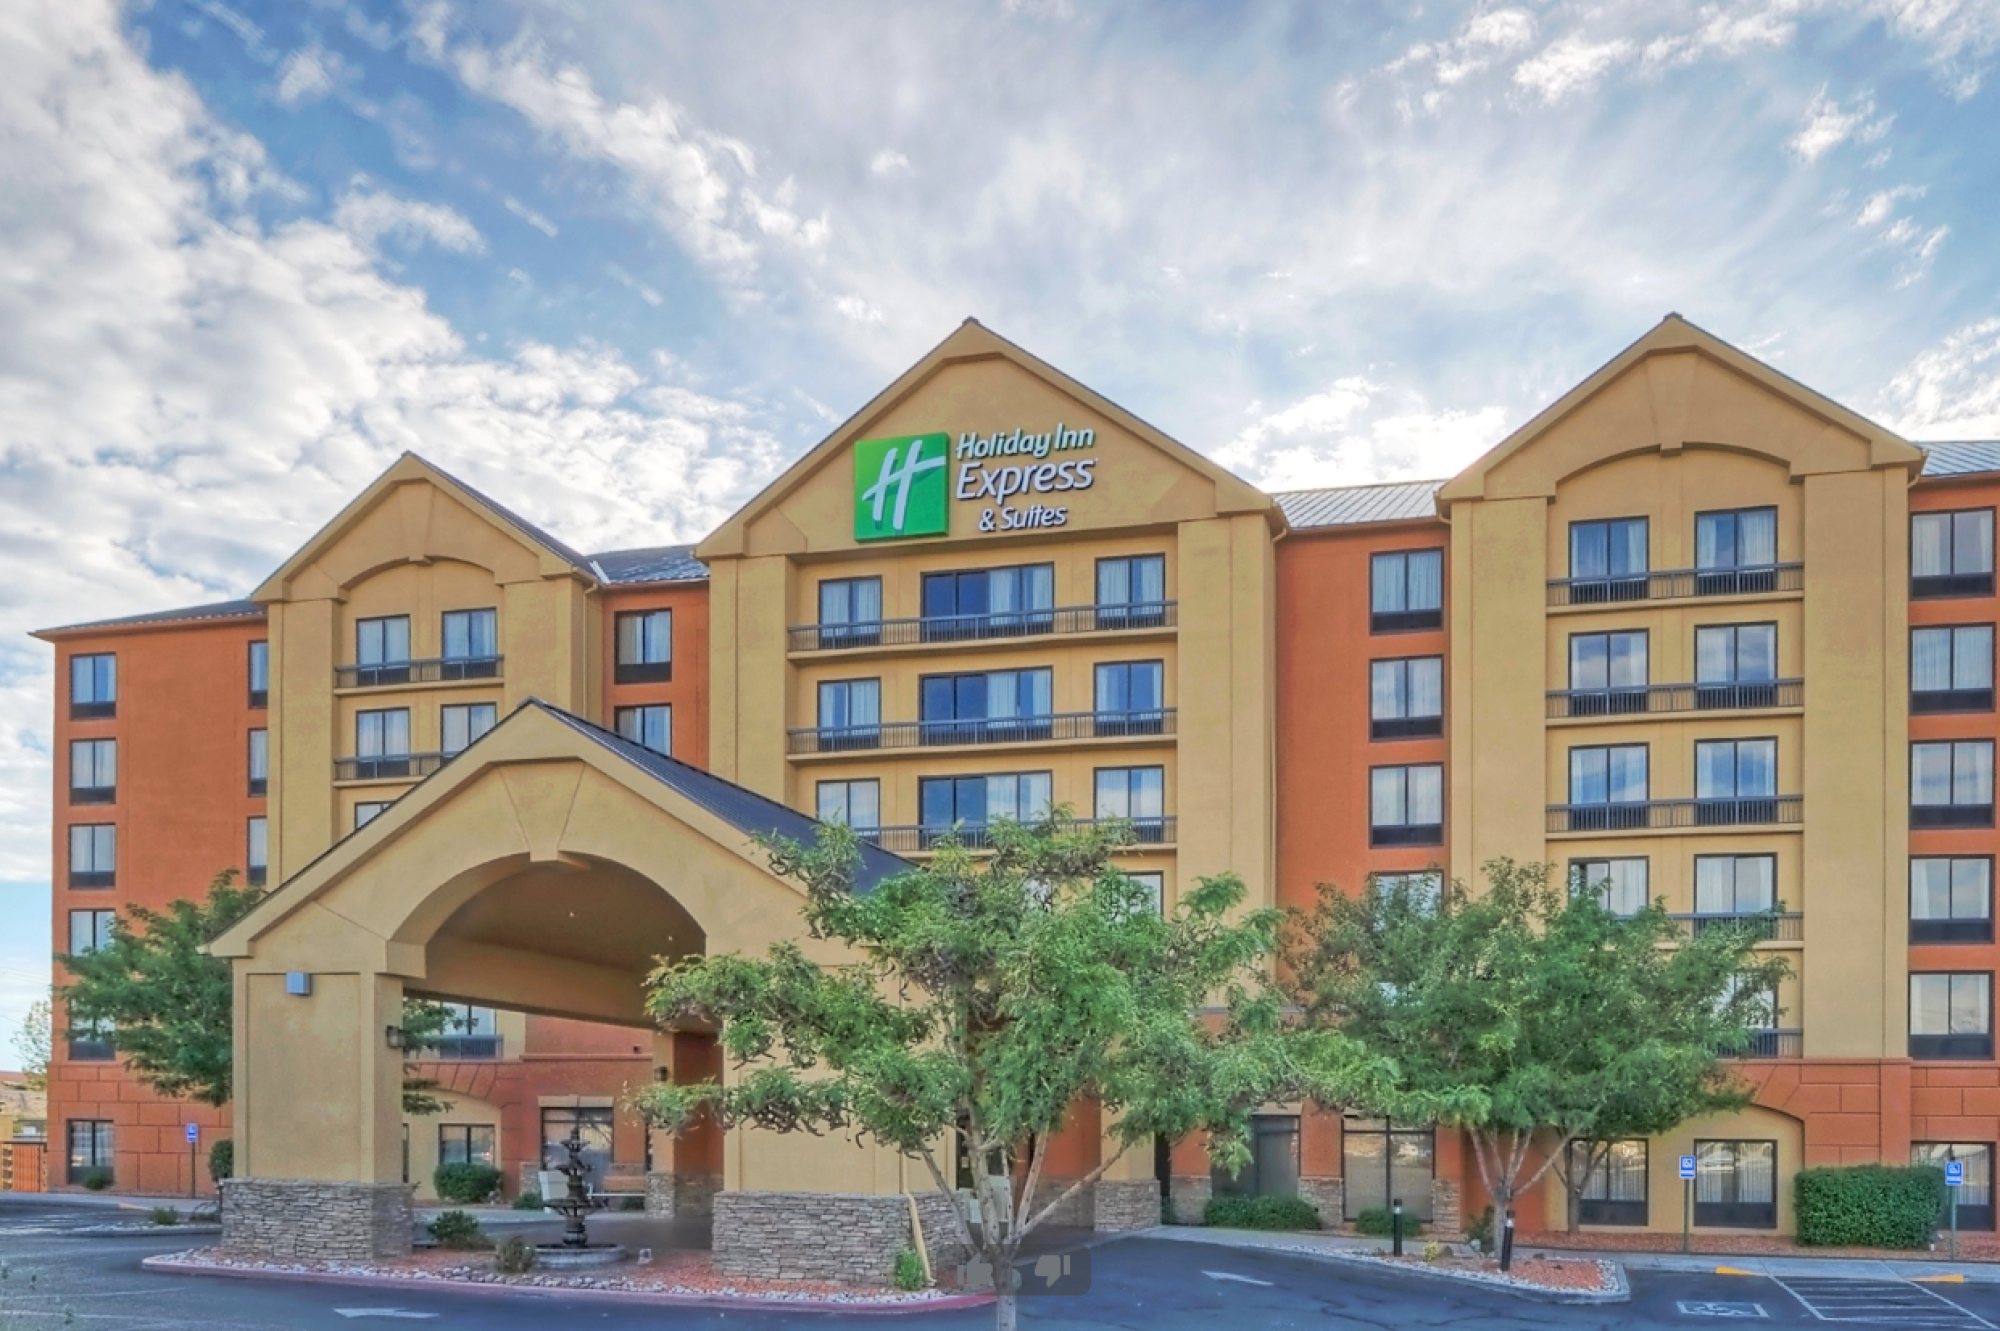 The image shows the exterior of a Holiday Inn Express & Suites hotel with a well-maintained entrance, trees, and a partly cloudy sky in the background.